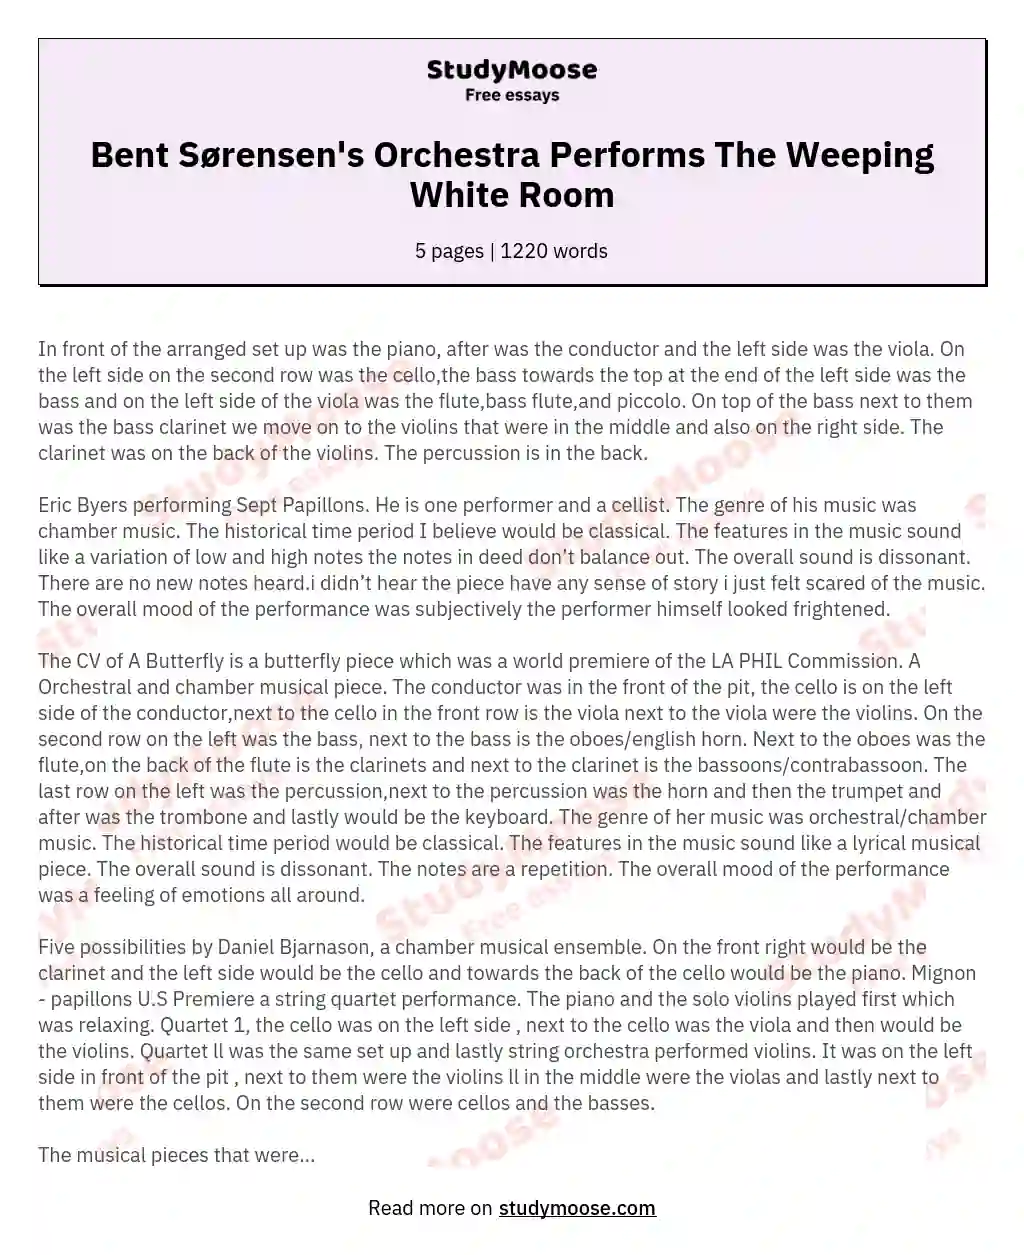 Bent Sørensen's Orchestra Performs The Weeping White Room essay